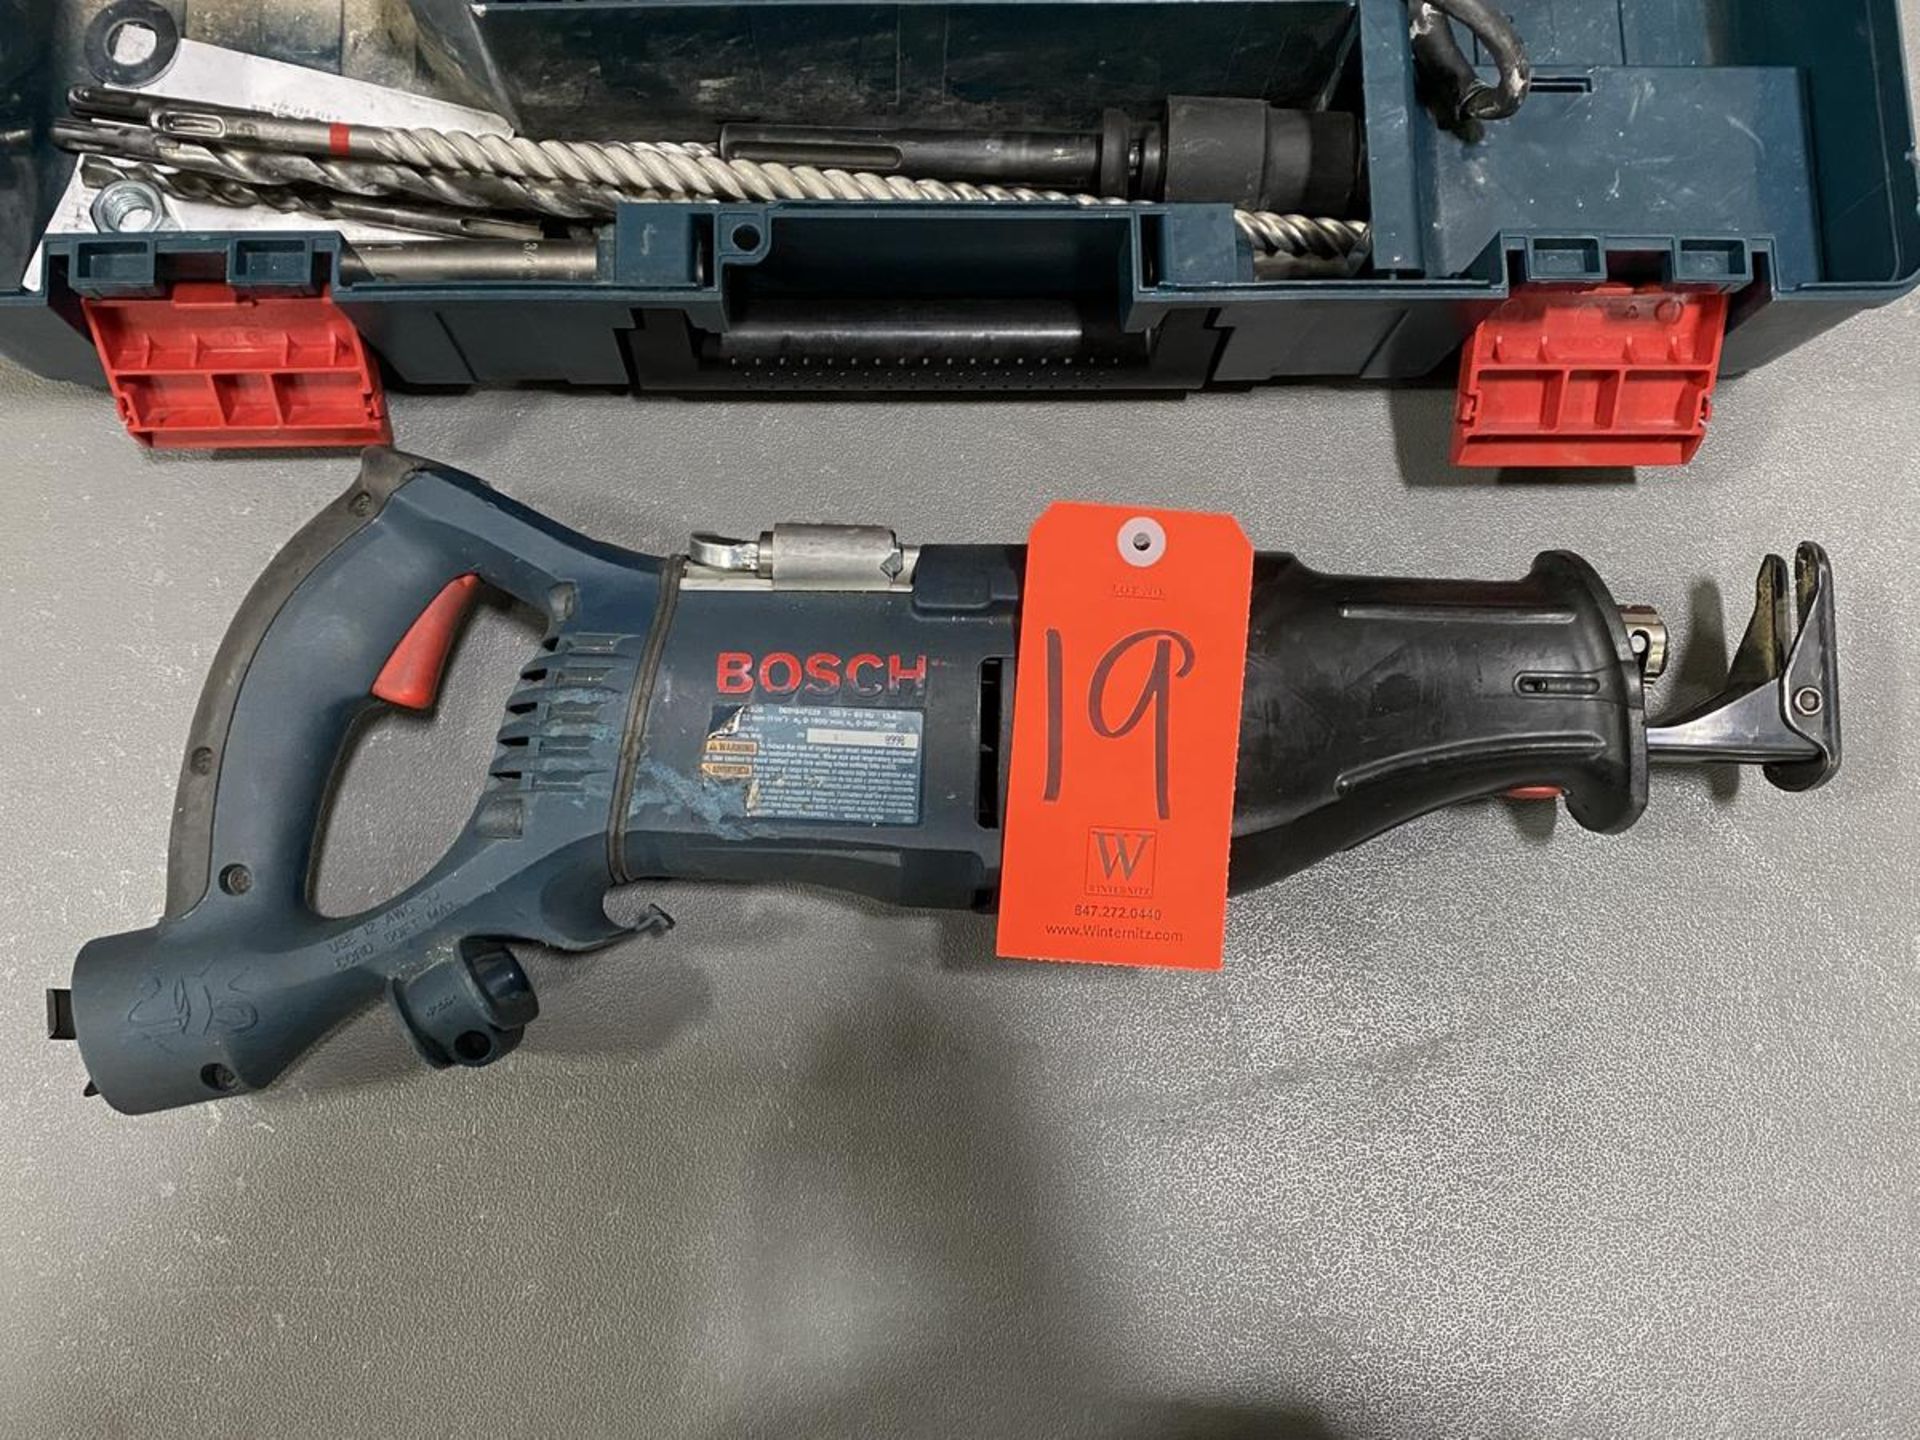 Lot - Bosch Model 11264EVS Hammer, S/N: 3611B64011, 4 in. Thick Wall Core Bits, 120-V, 60-Hz; - Image 2 of 3